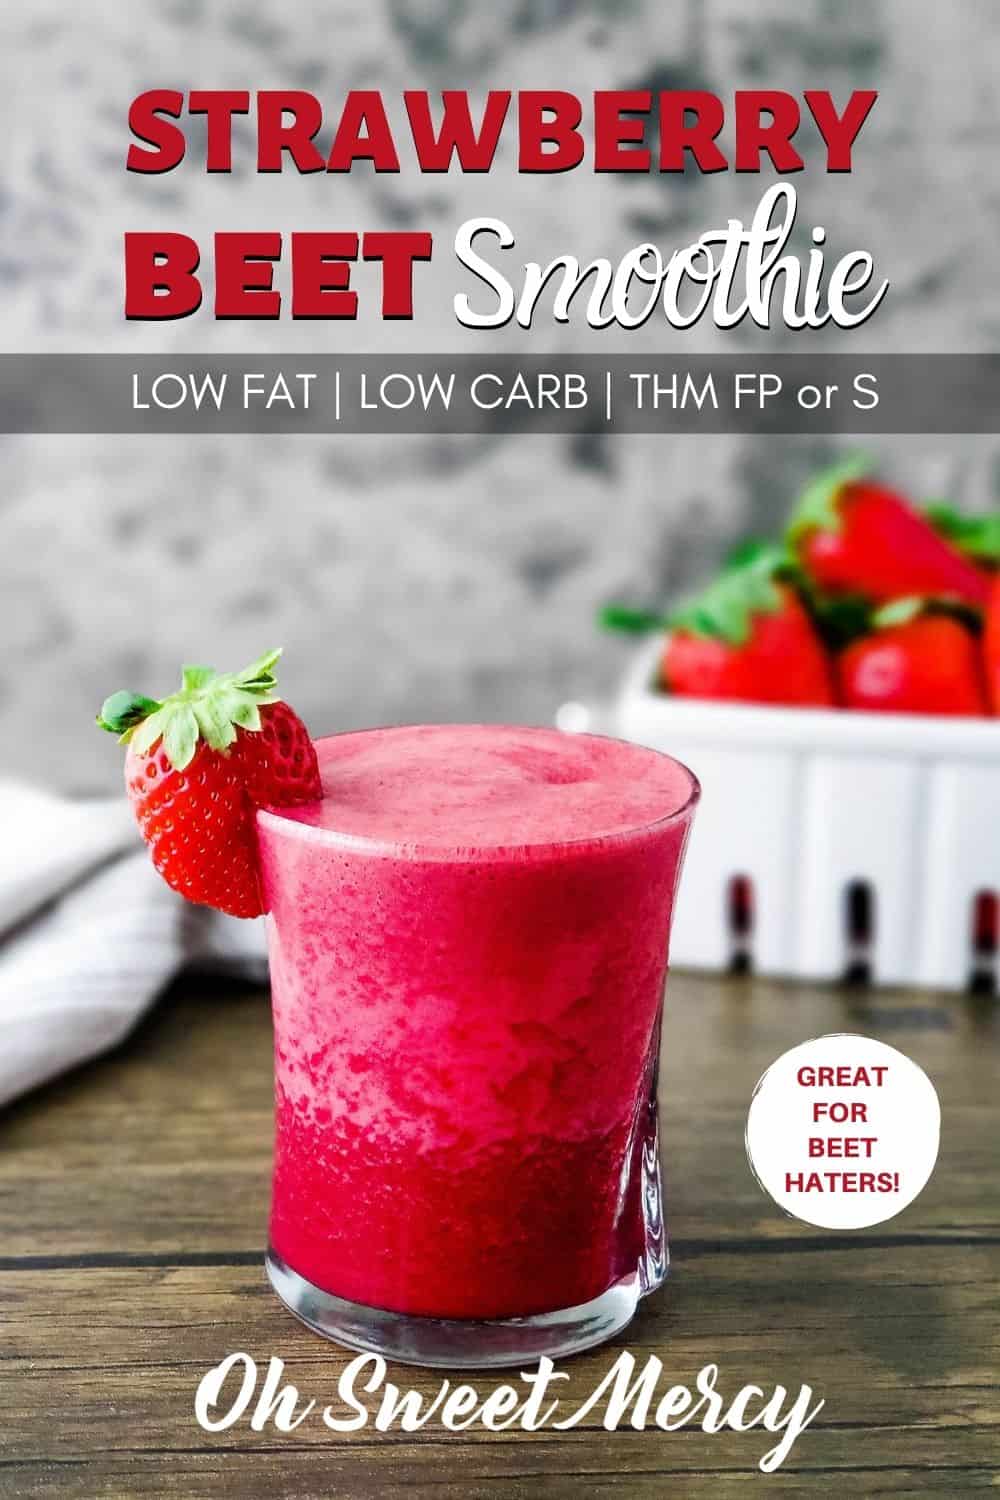 Hate beets but want their superfood benefits? Hide them in my Strawberry Beet Smoothie! Super power your regular old strawberry smoothie with the ease of powdered beets. THM FP or S, dairy free and vegan option. So good!! #thm #lowfat #lowcarb #smoothies #beets #strawberries #superfoods @ohsweetmercy